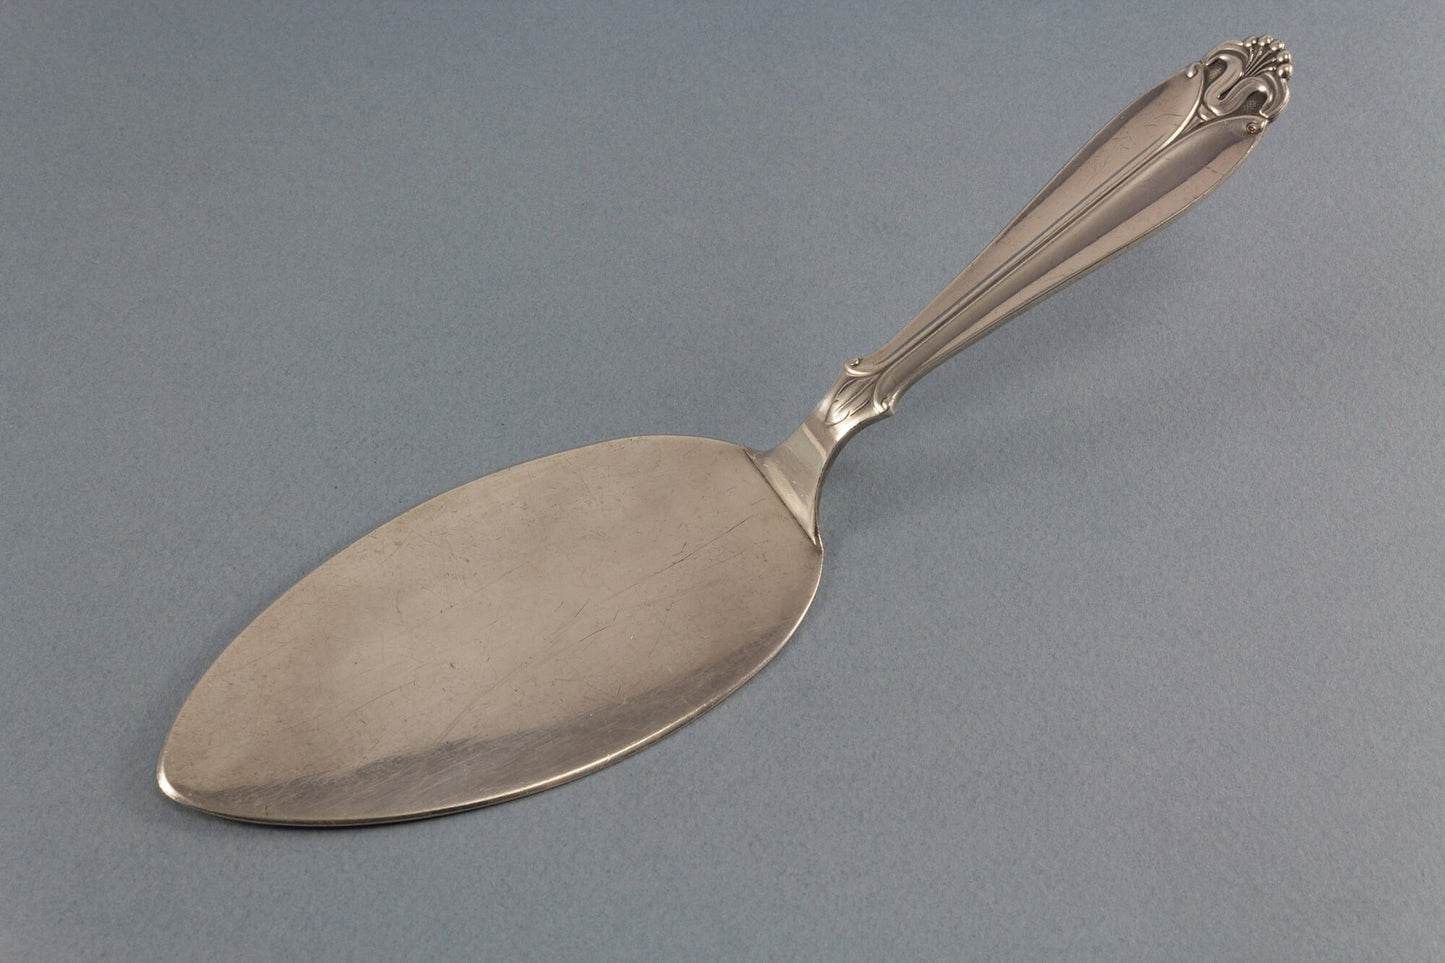 Silver-plated pastry server